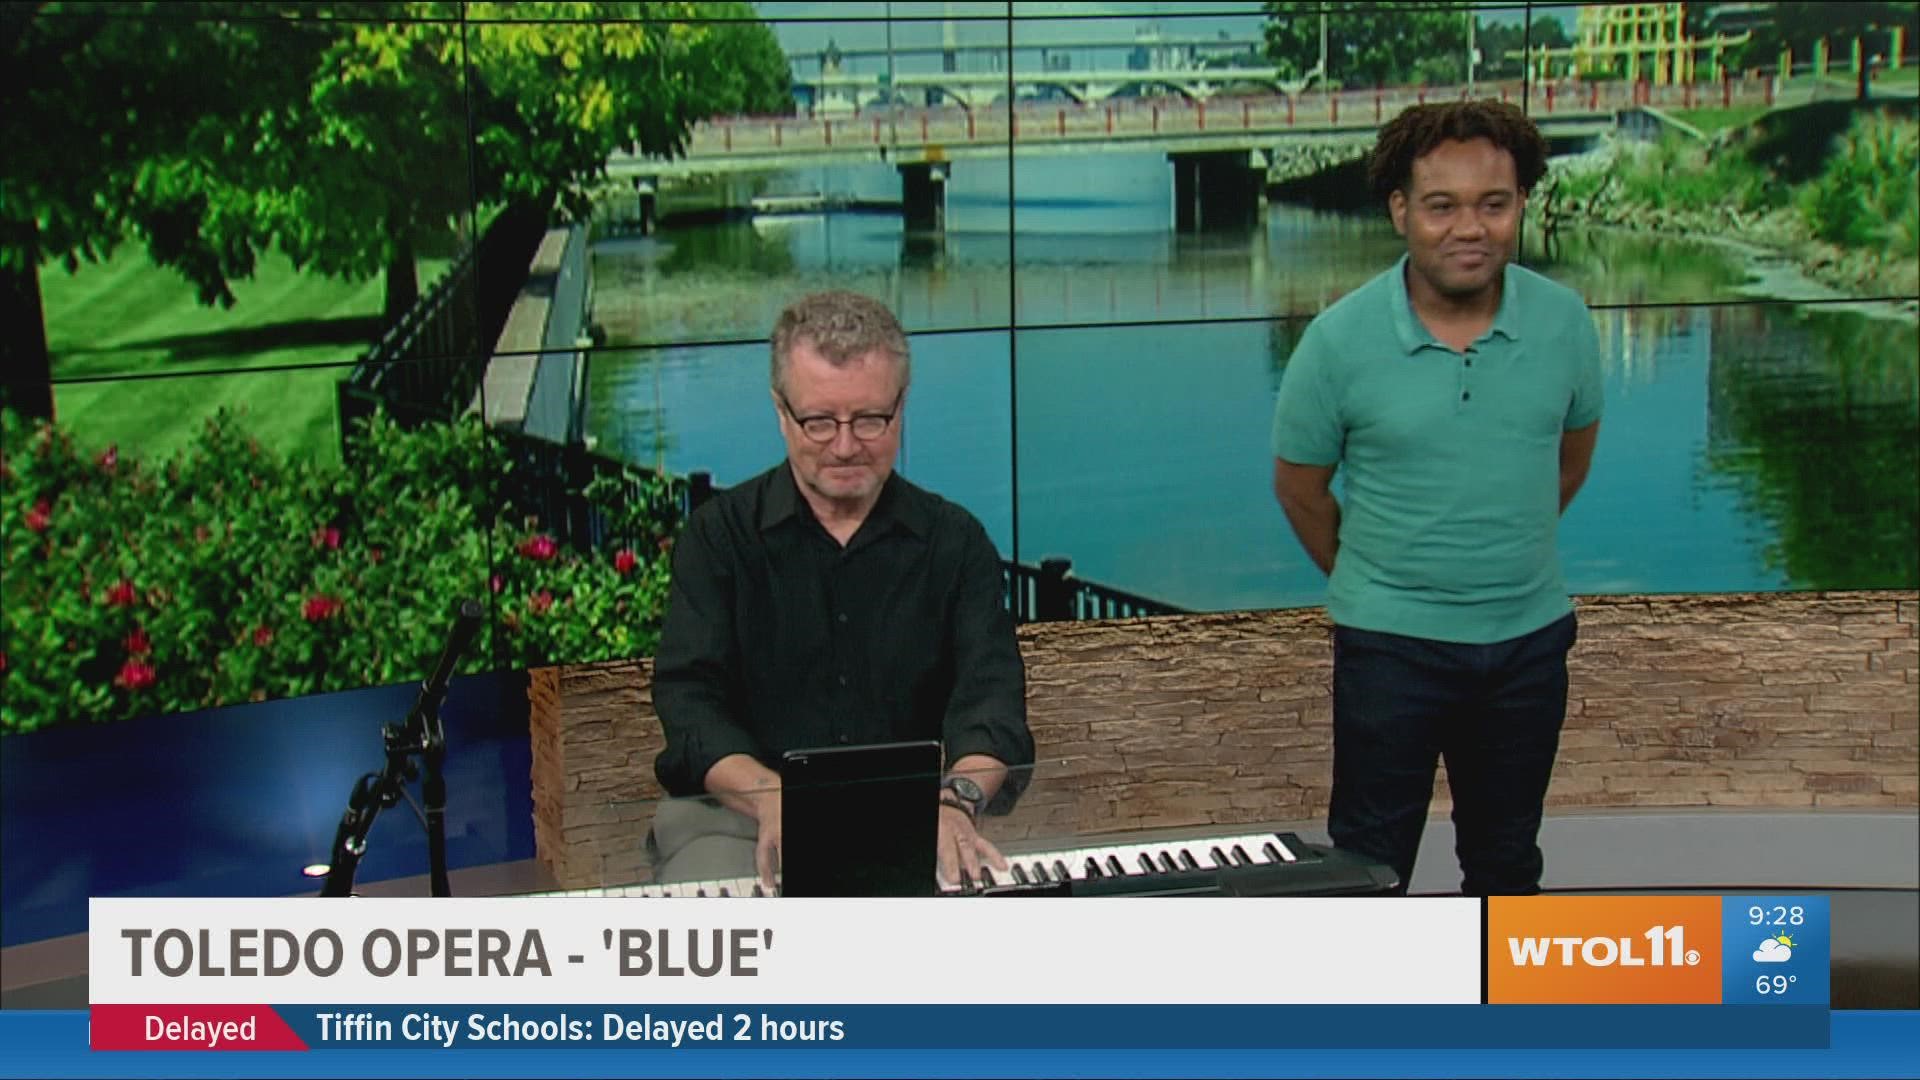 Award-winning opera 'Blue' comes to the Toledo Opera on Aug. 26 at 7:30 p.m. and Aug. 28 at 2 p.m.